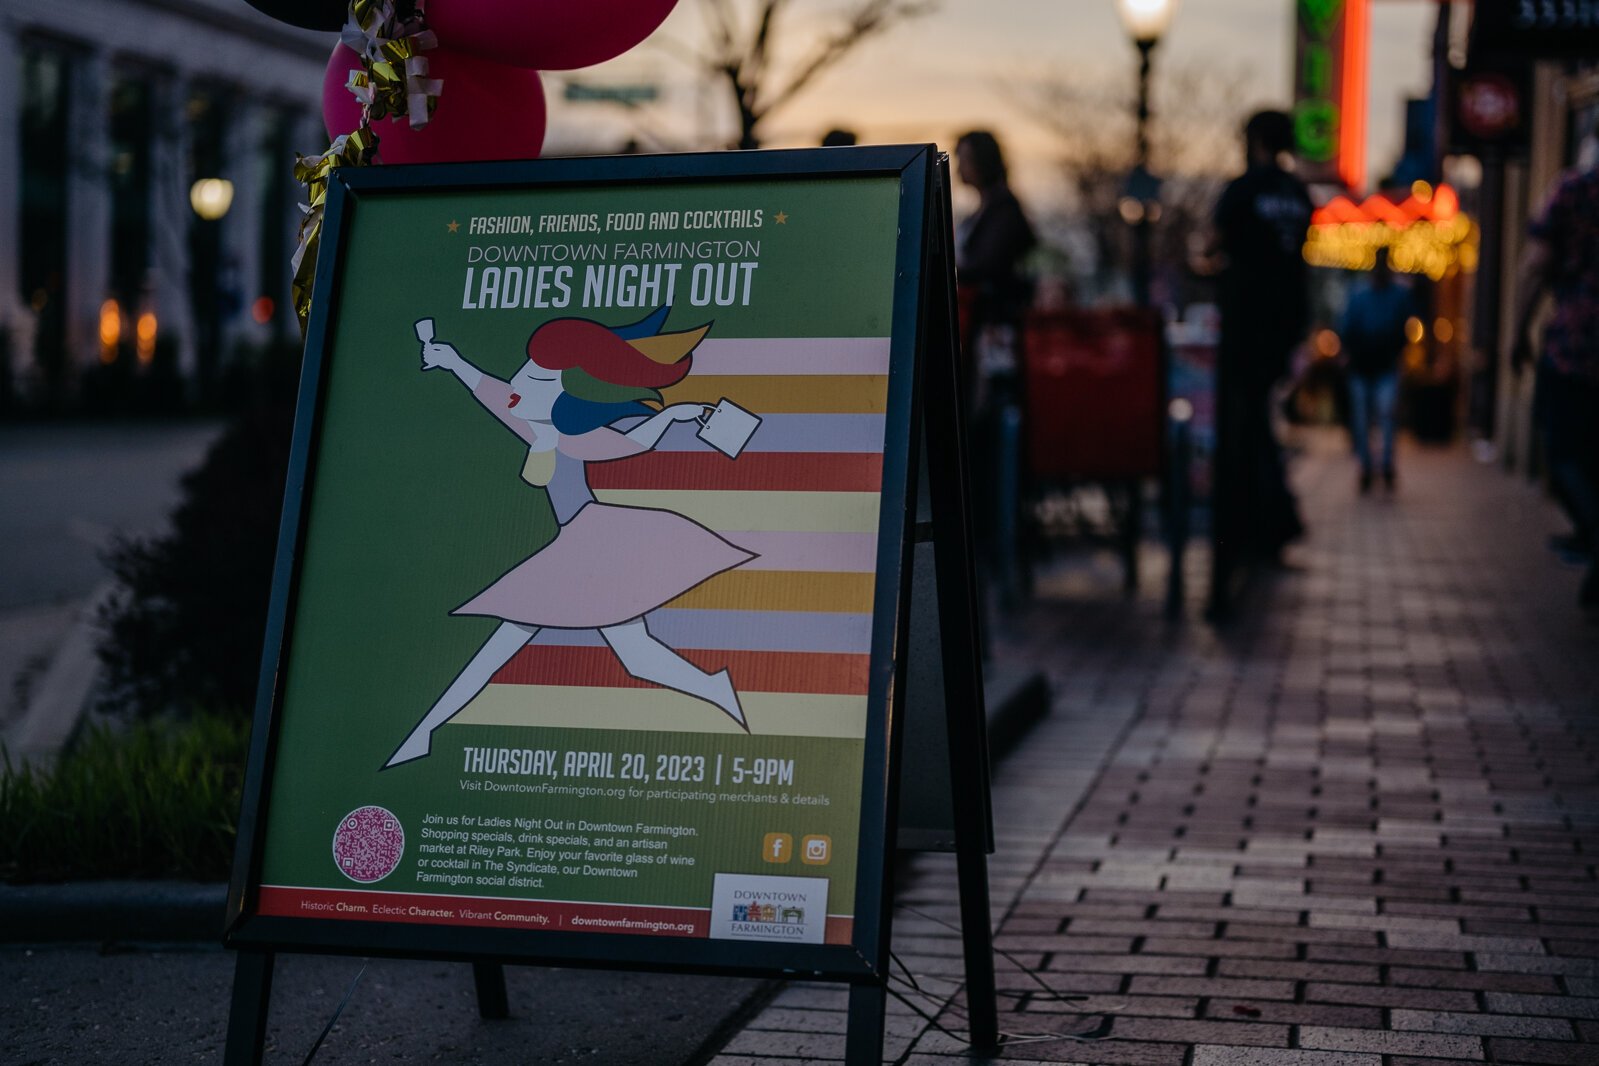 Contributing photographer Steve Koss spends an evening in downtown Farmington, capturing the fashion, friends, food and cocktails shared amongst those attending this season’s Ladies Night Out.